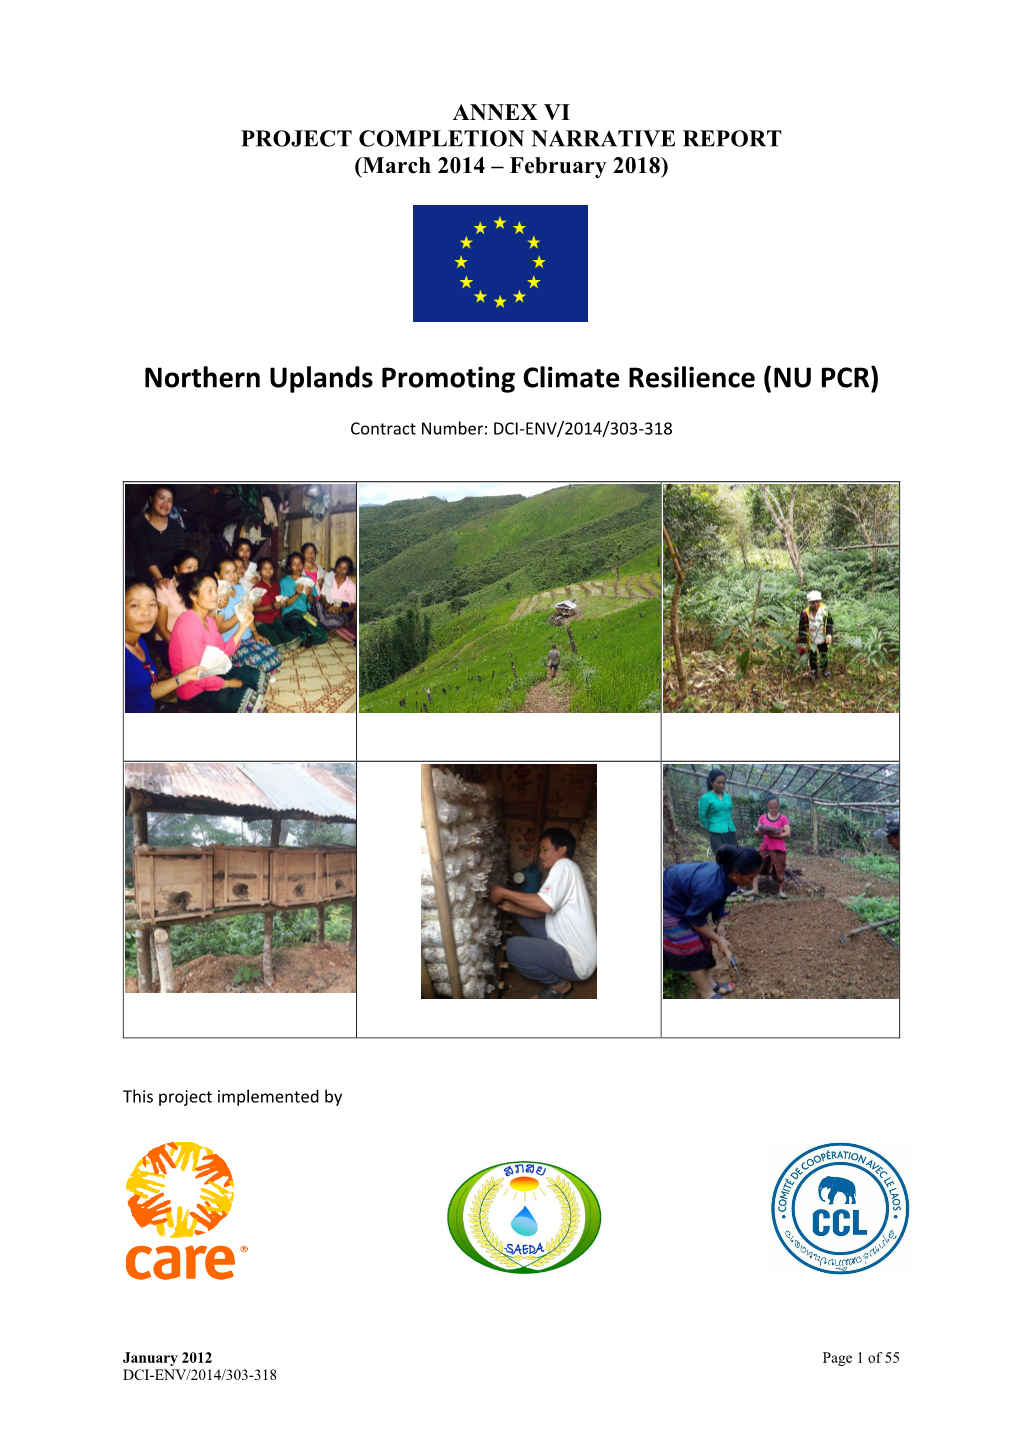 Northern Uplands Promoting Climate Resilience (NU PCR)